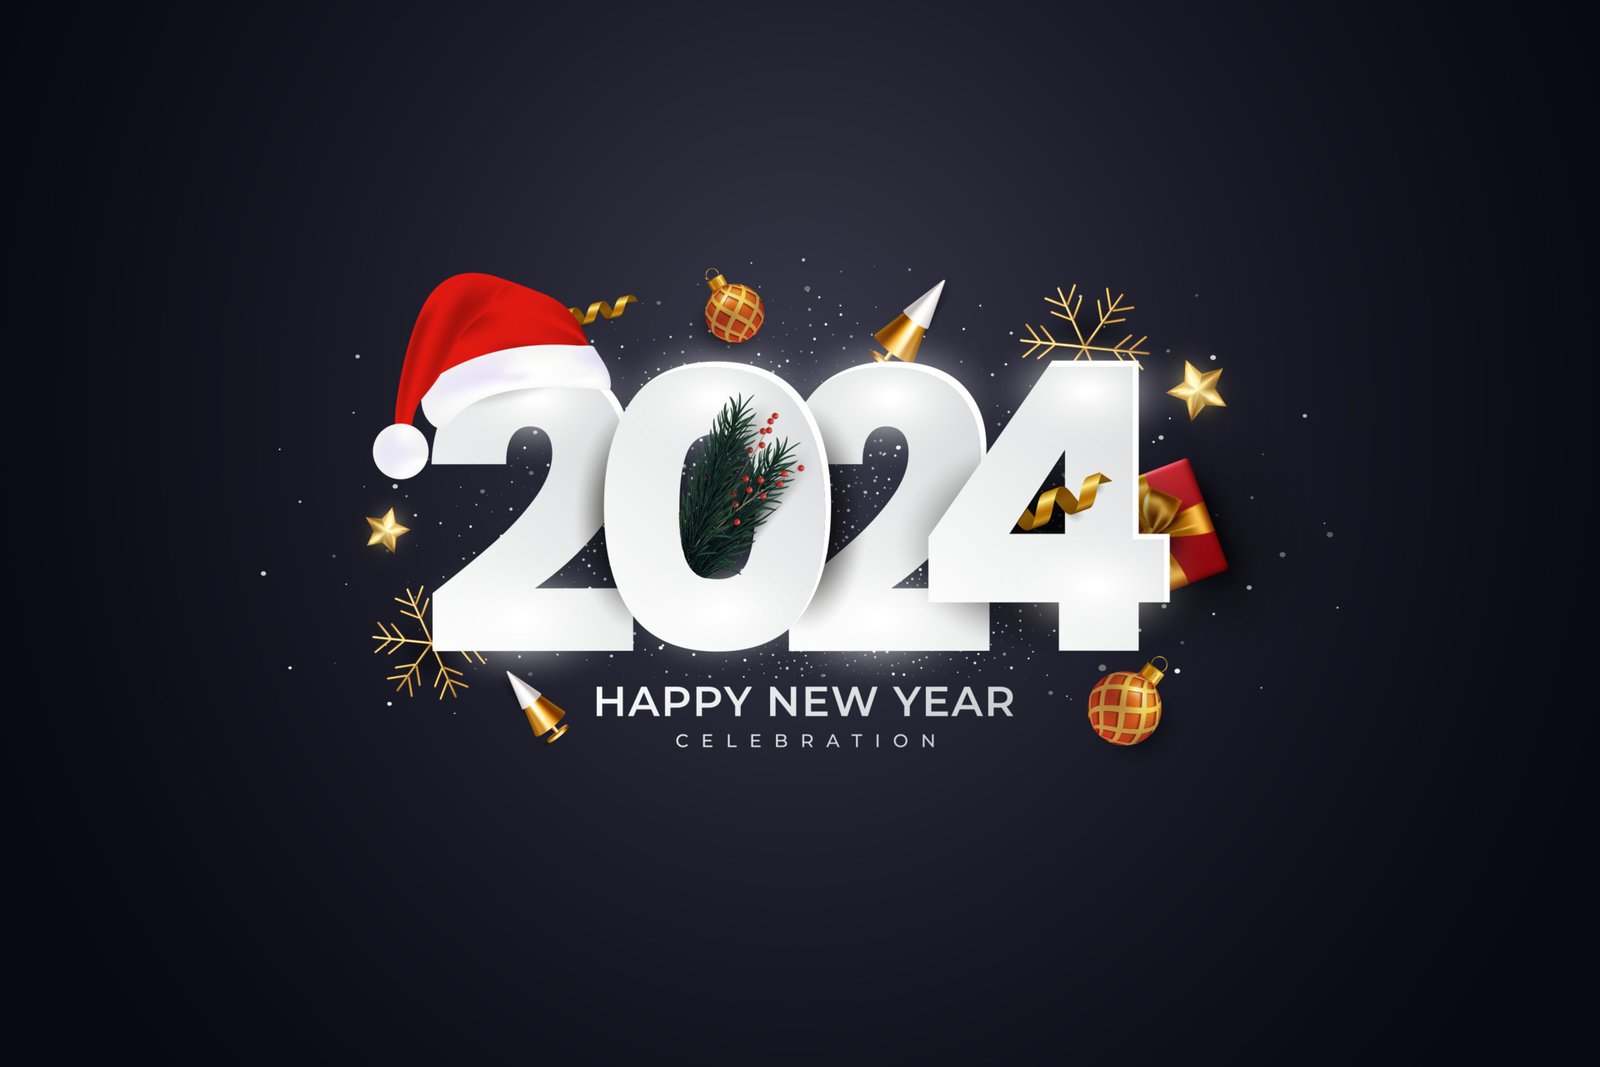 Happy New Year 2024 https://foundationtimes.com/